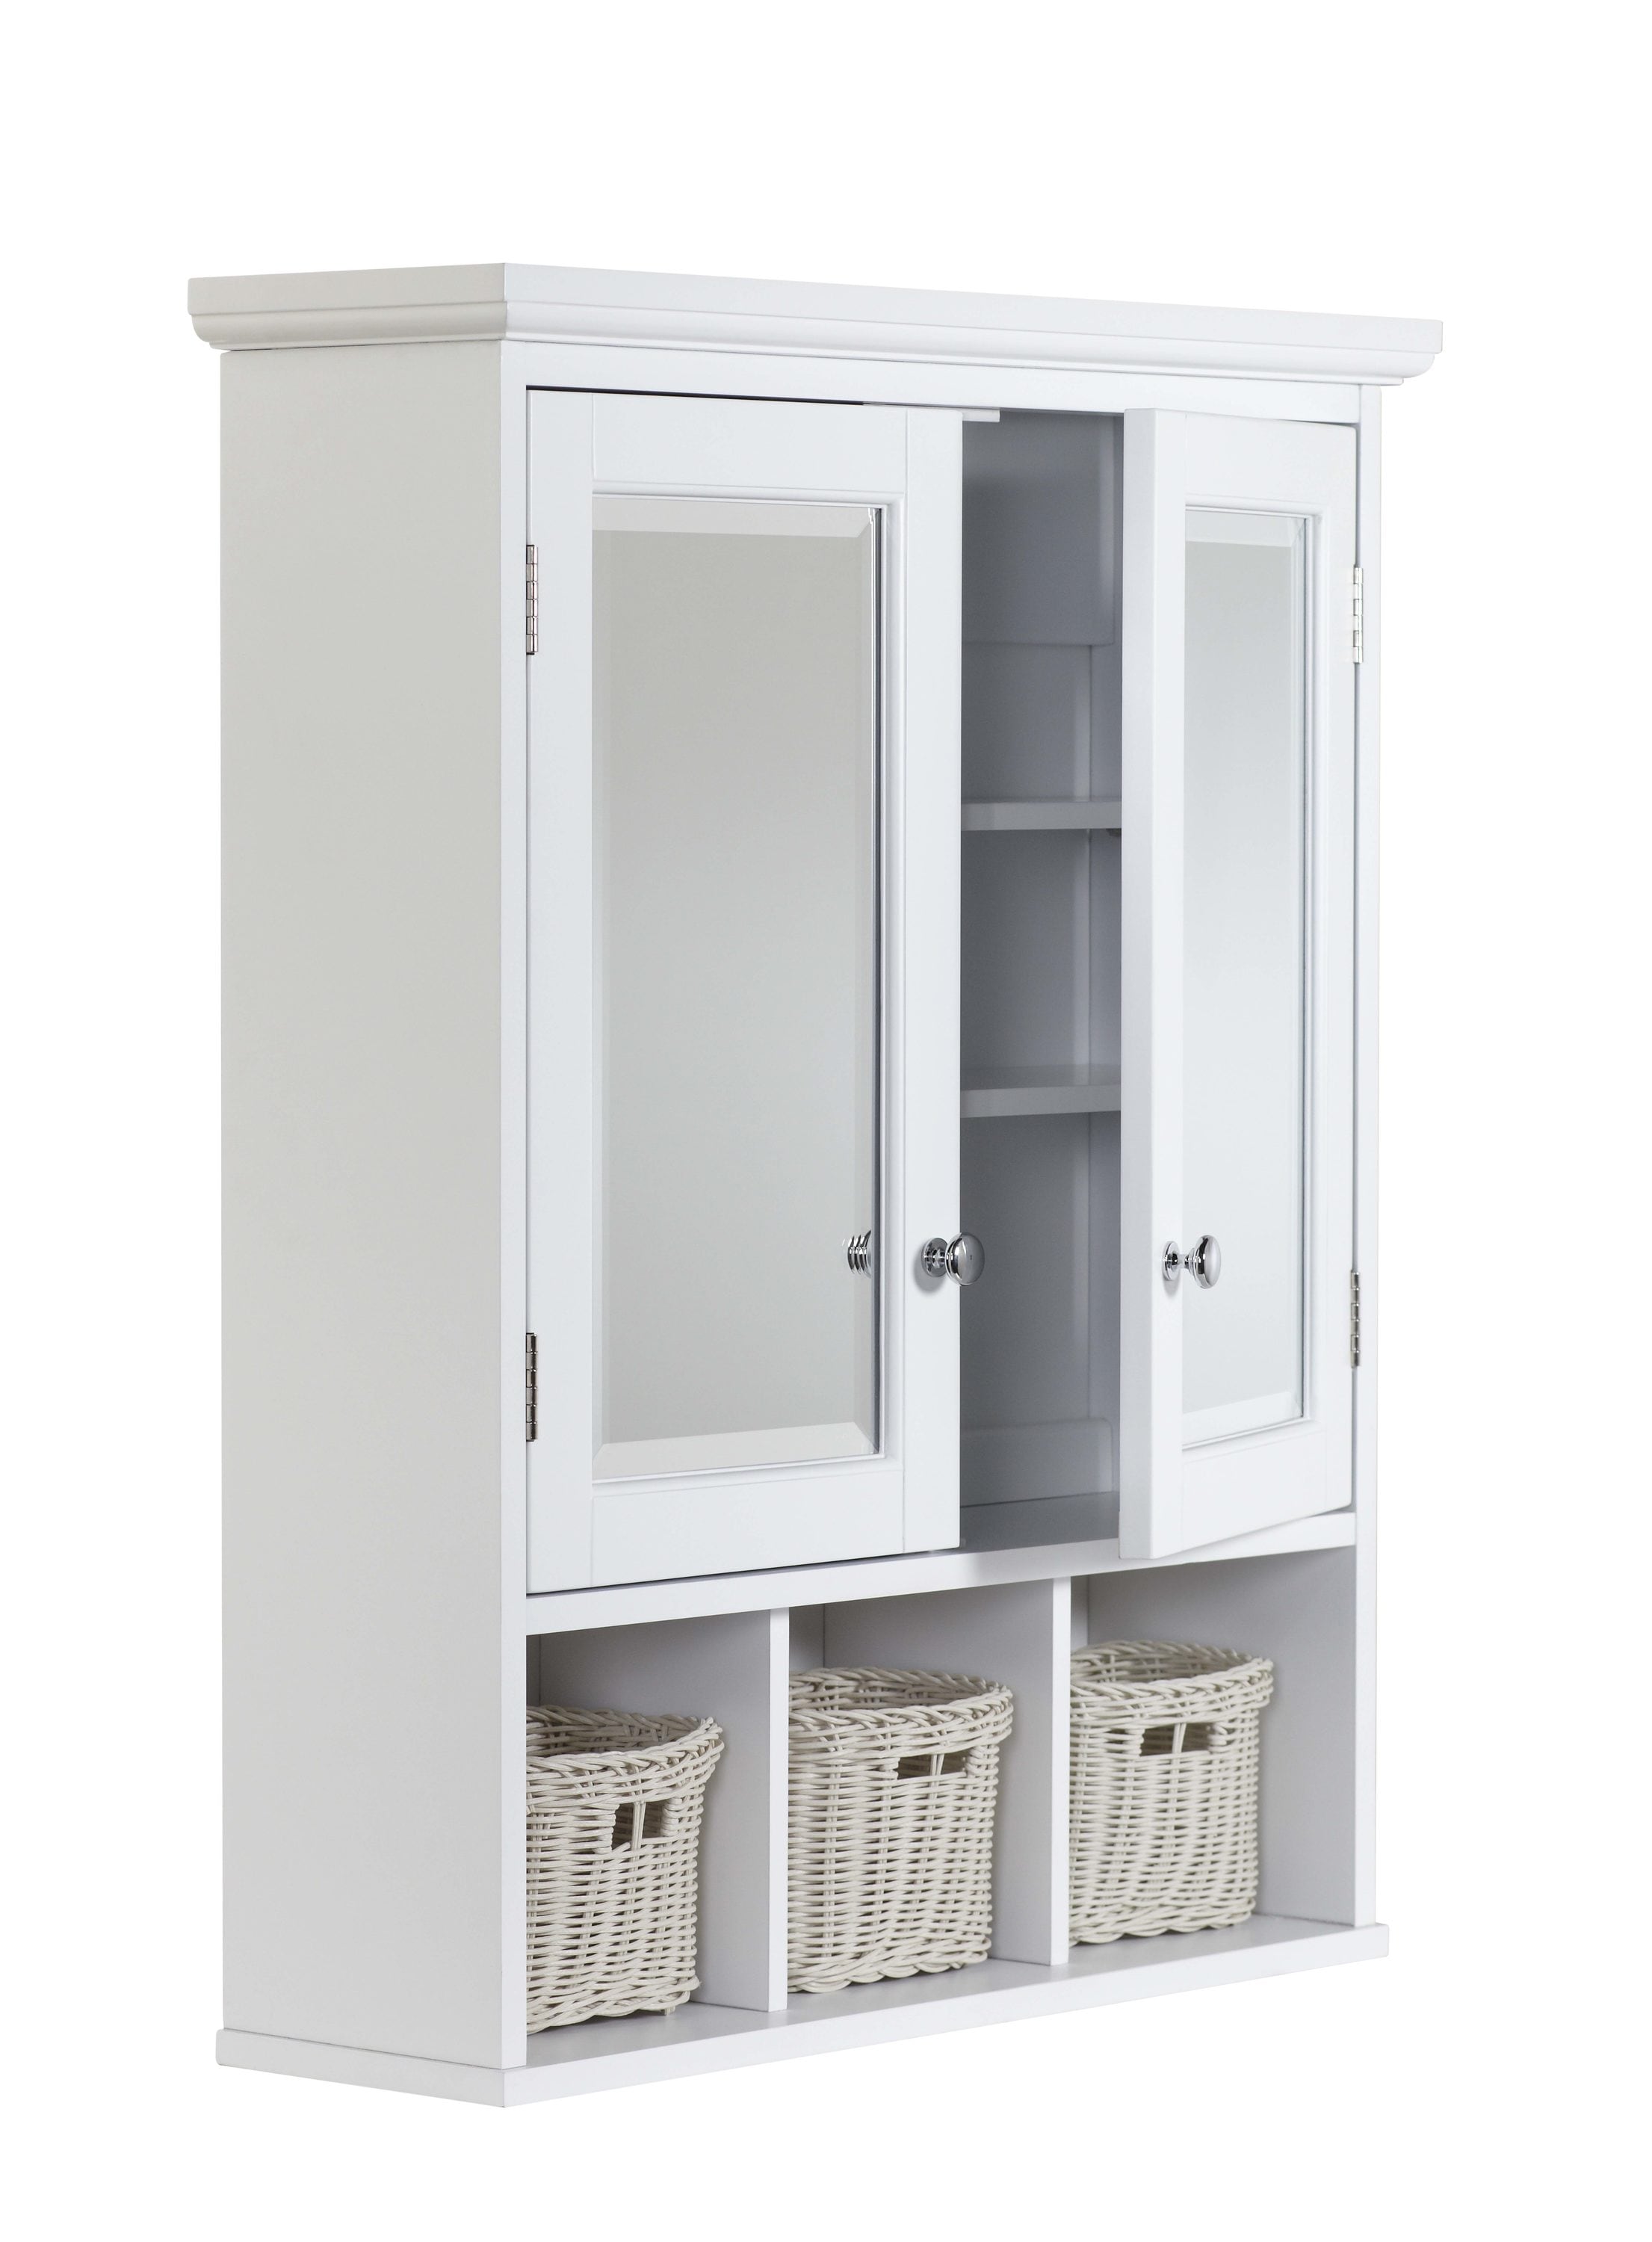 Allen Roth 24 75 In X 30 25 Surface Mount White Mirrored Soft Close Medicine Cabinet The Cabinets Department At Lowes Com